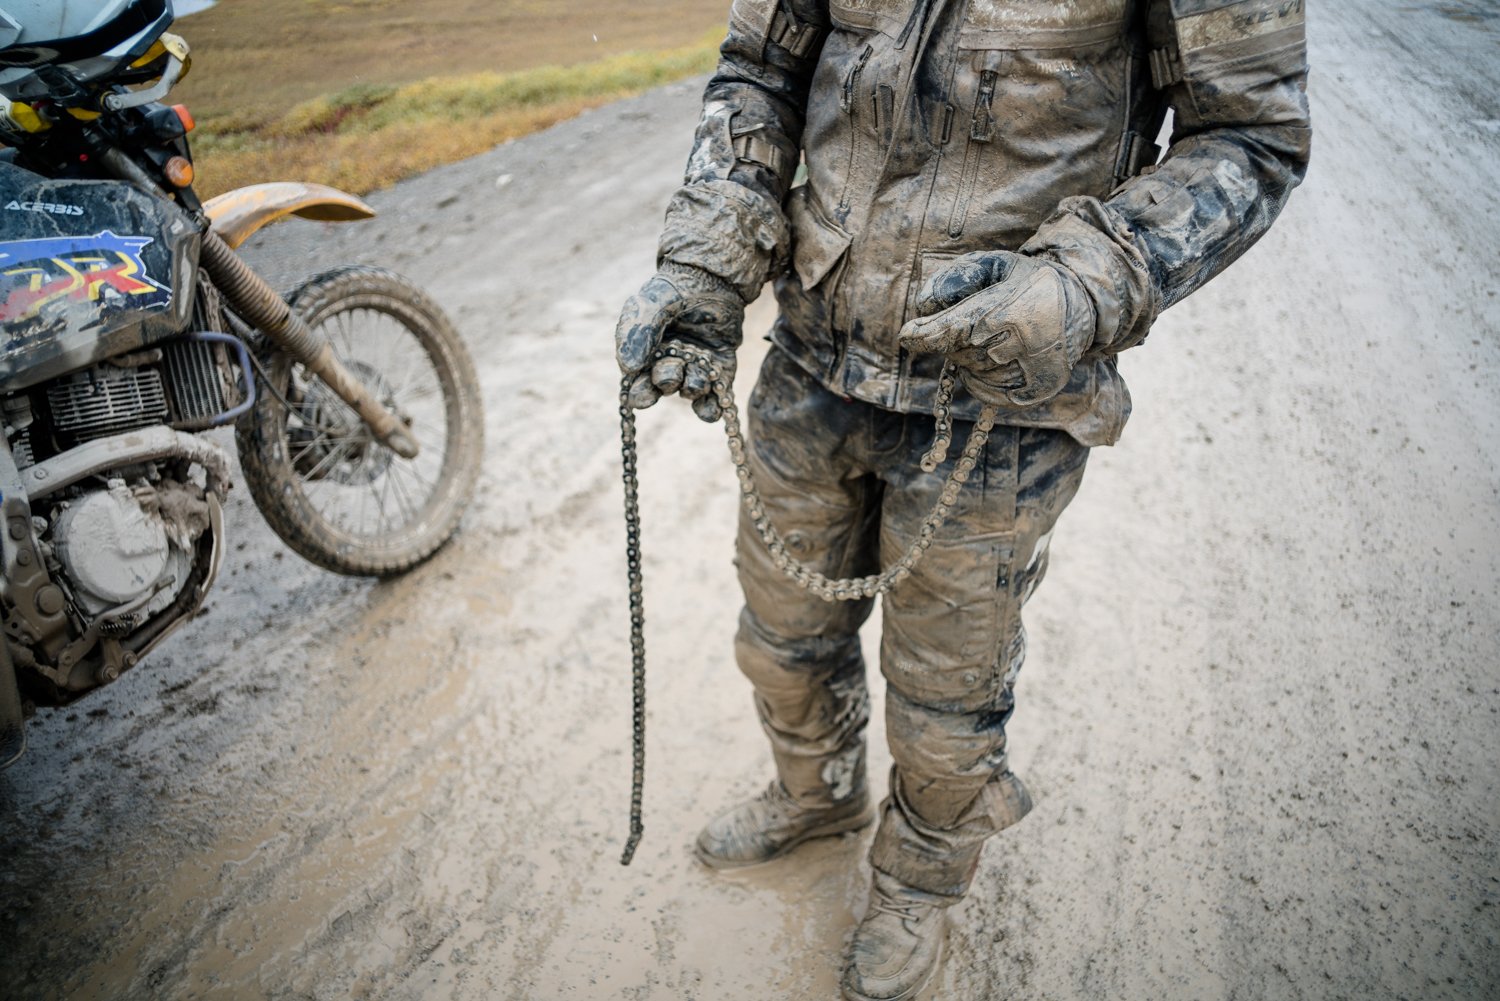  Motorcycle and mud covered rider with broke motorcycle chain in his hands. 